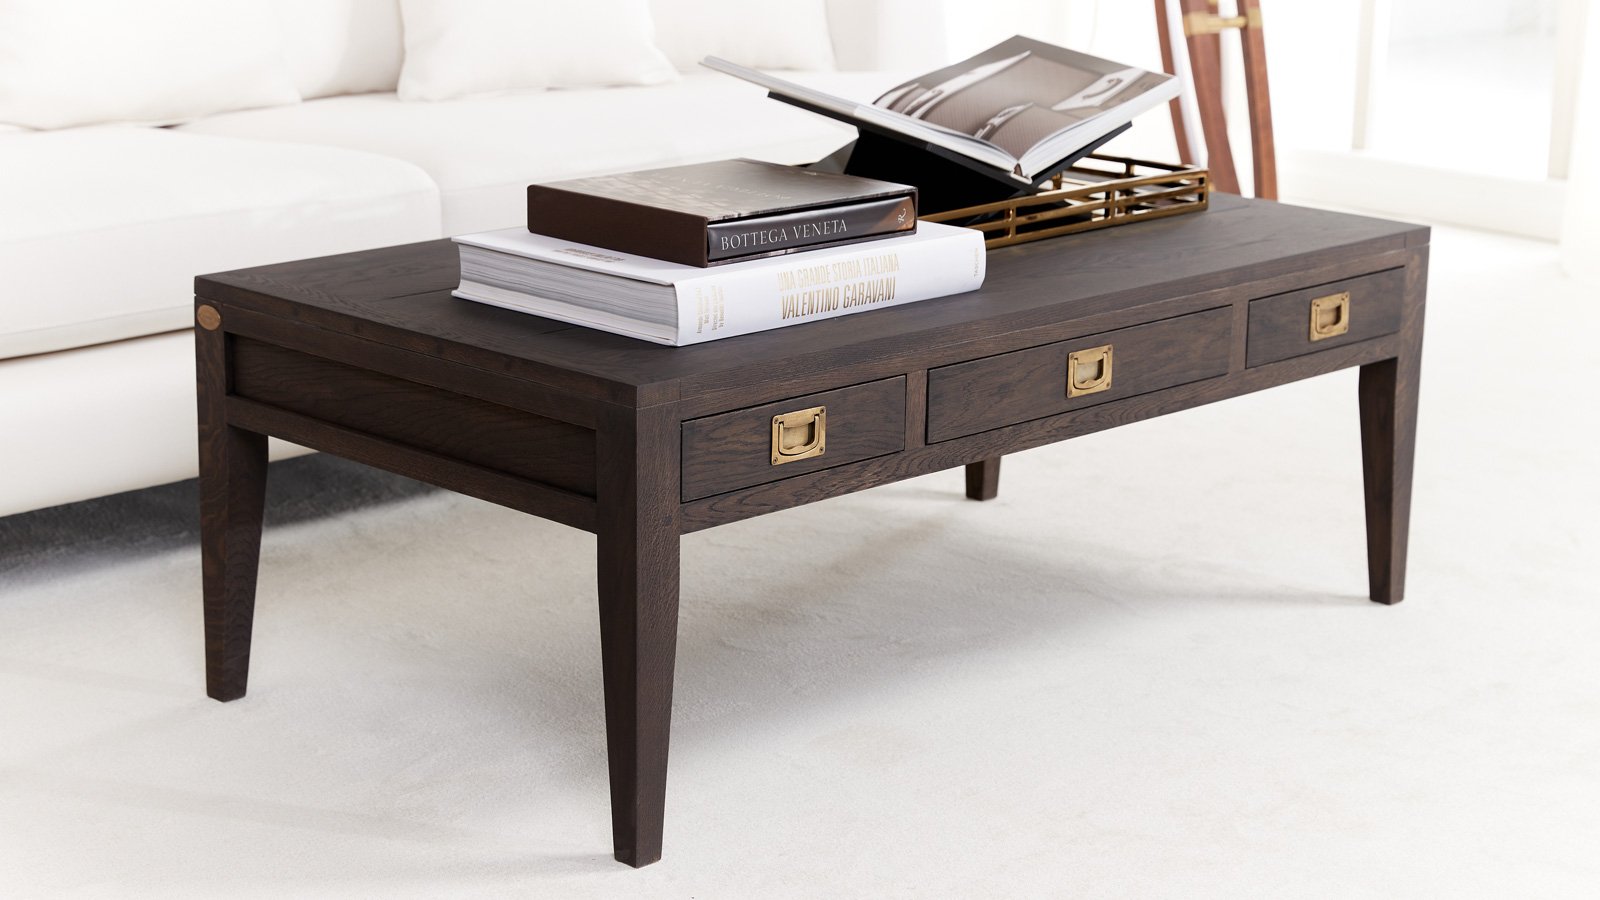 Tables | Exclusive tables for every room